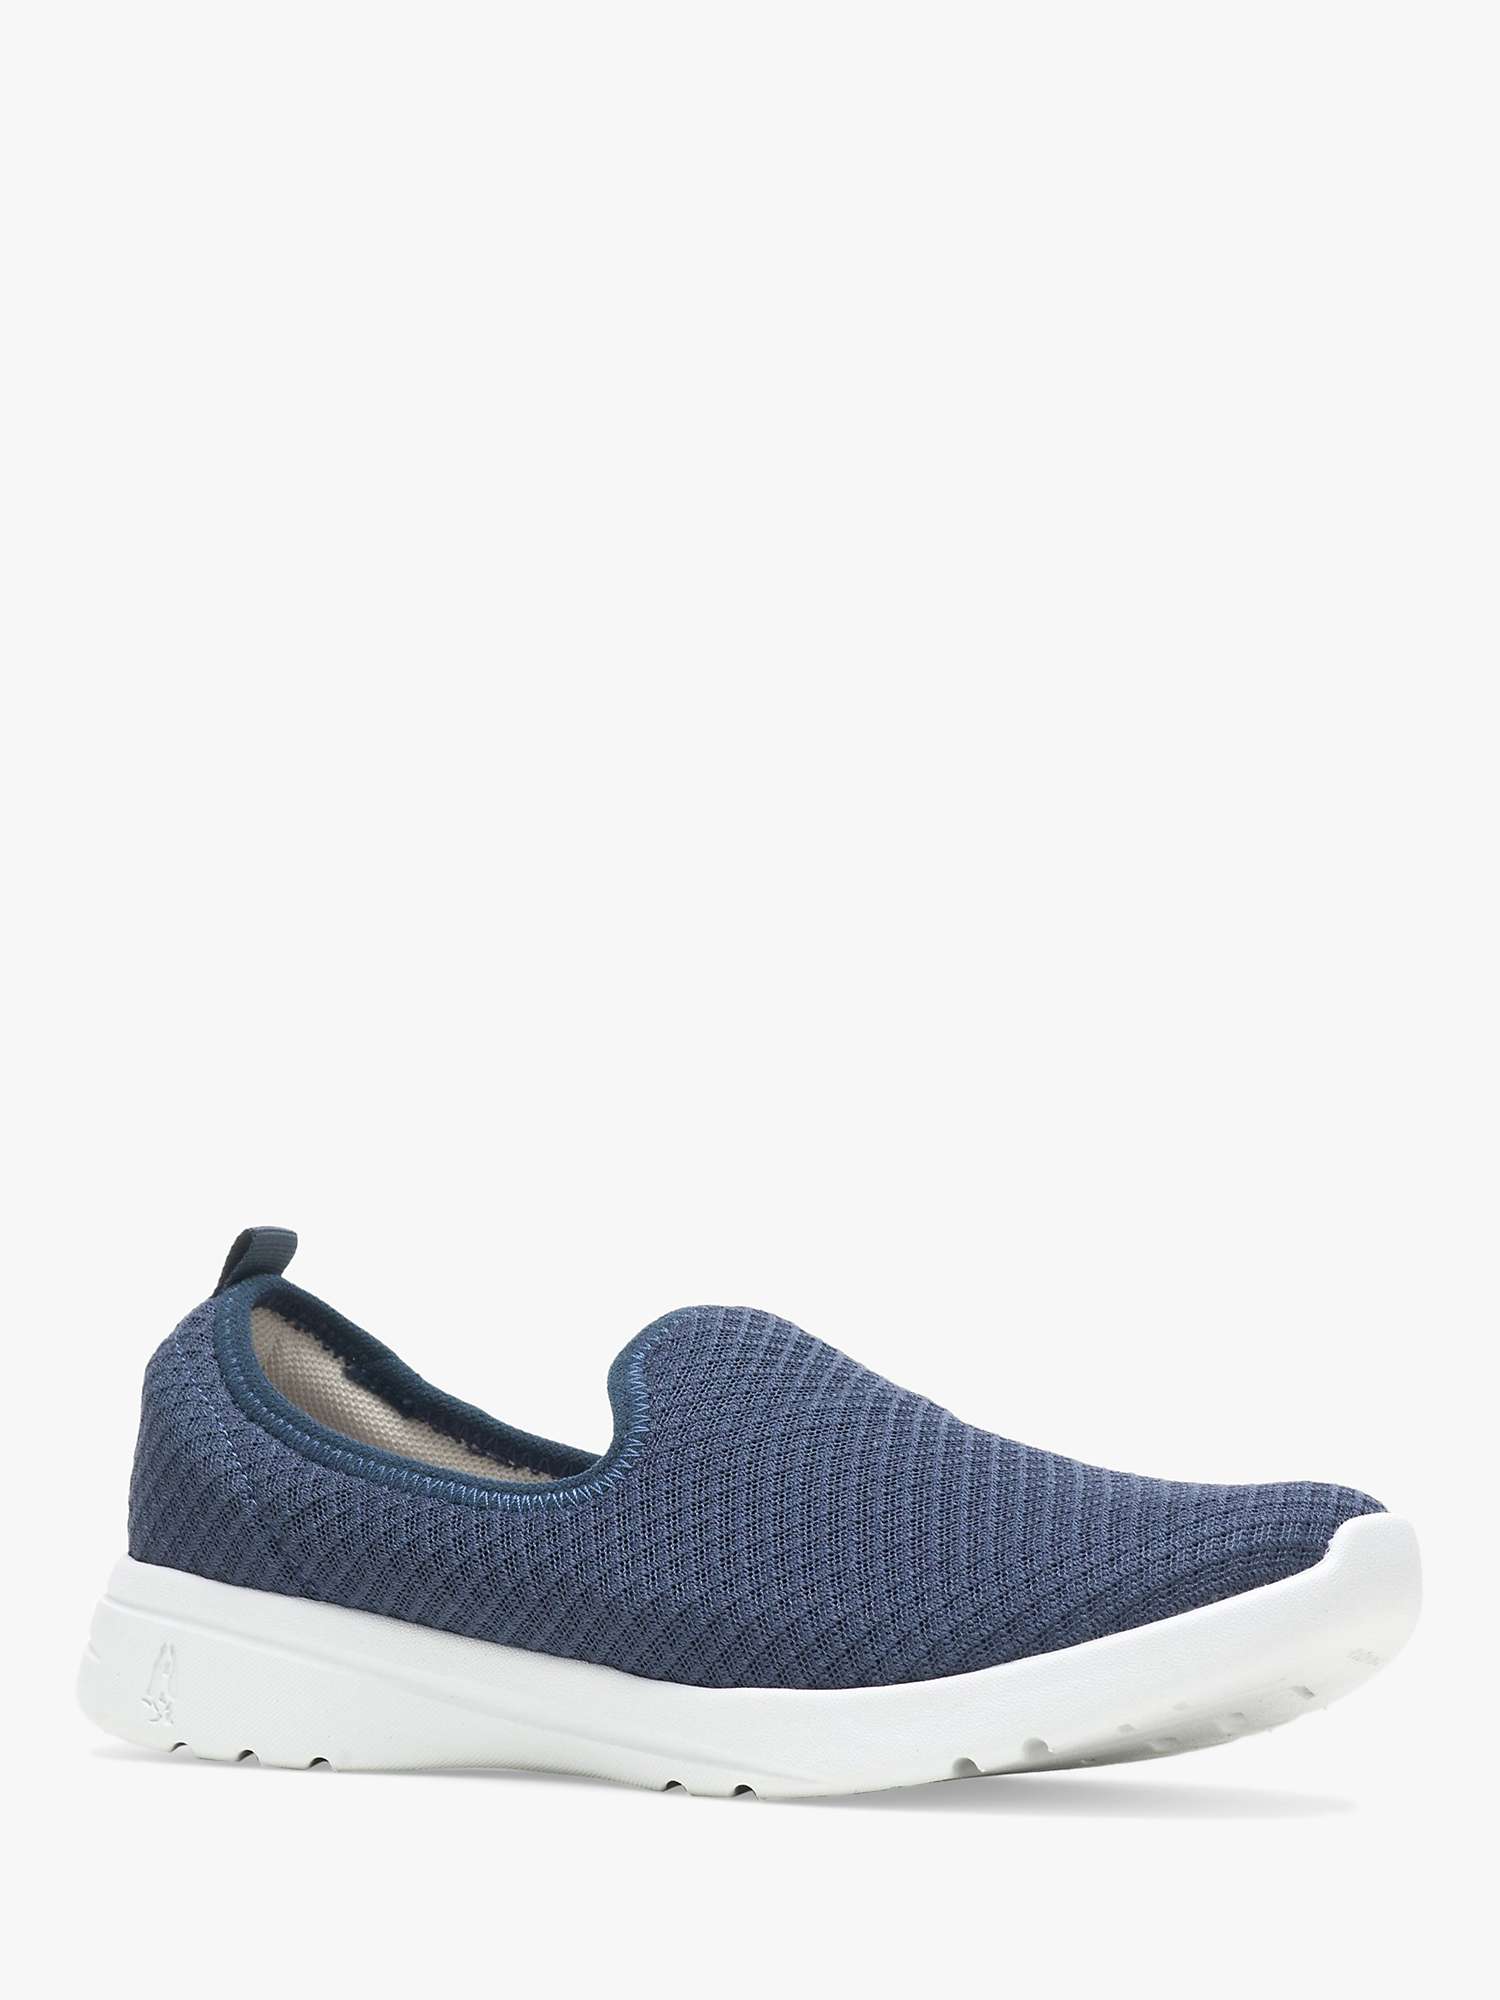 Buy Hush Puppies Good Slip-On Trainers, Navy Online at johnlewis.com